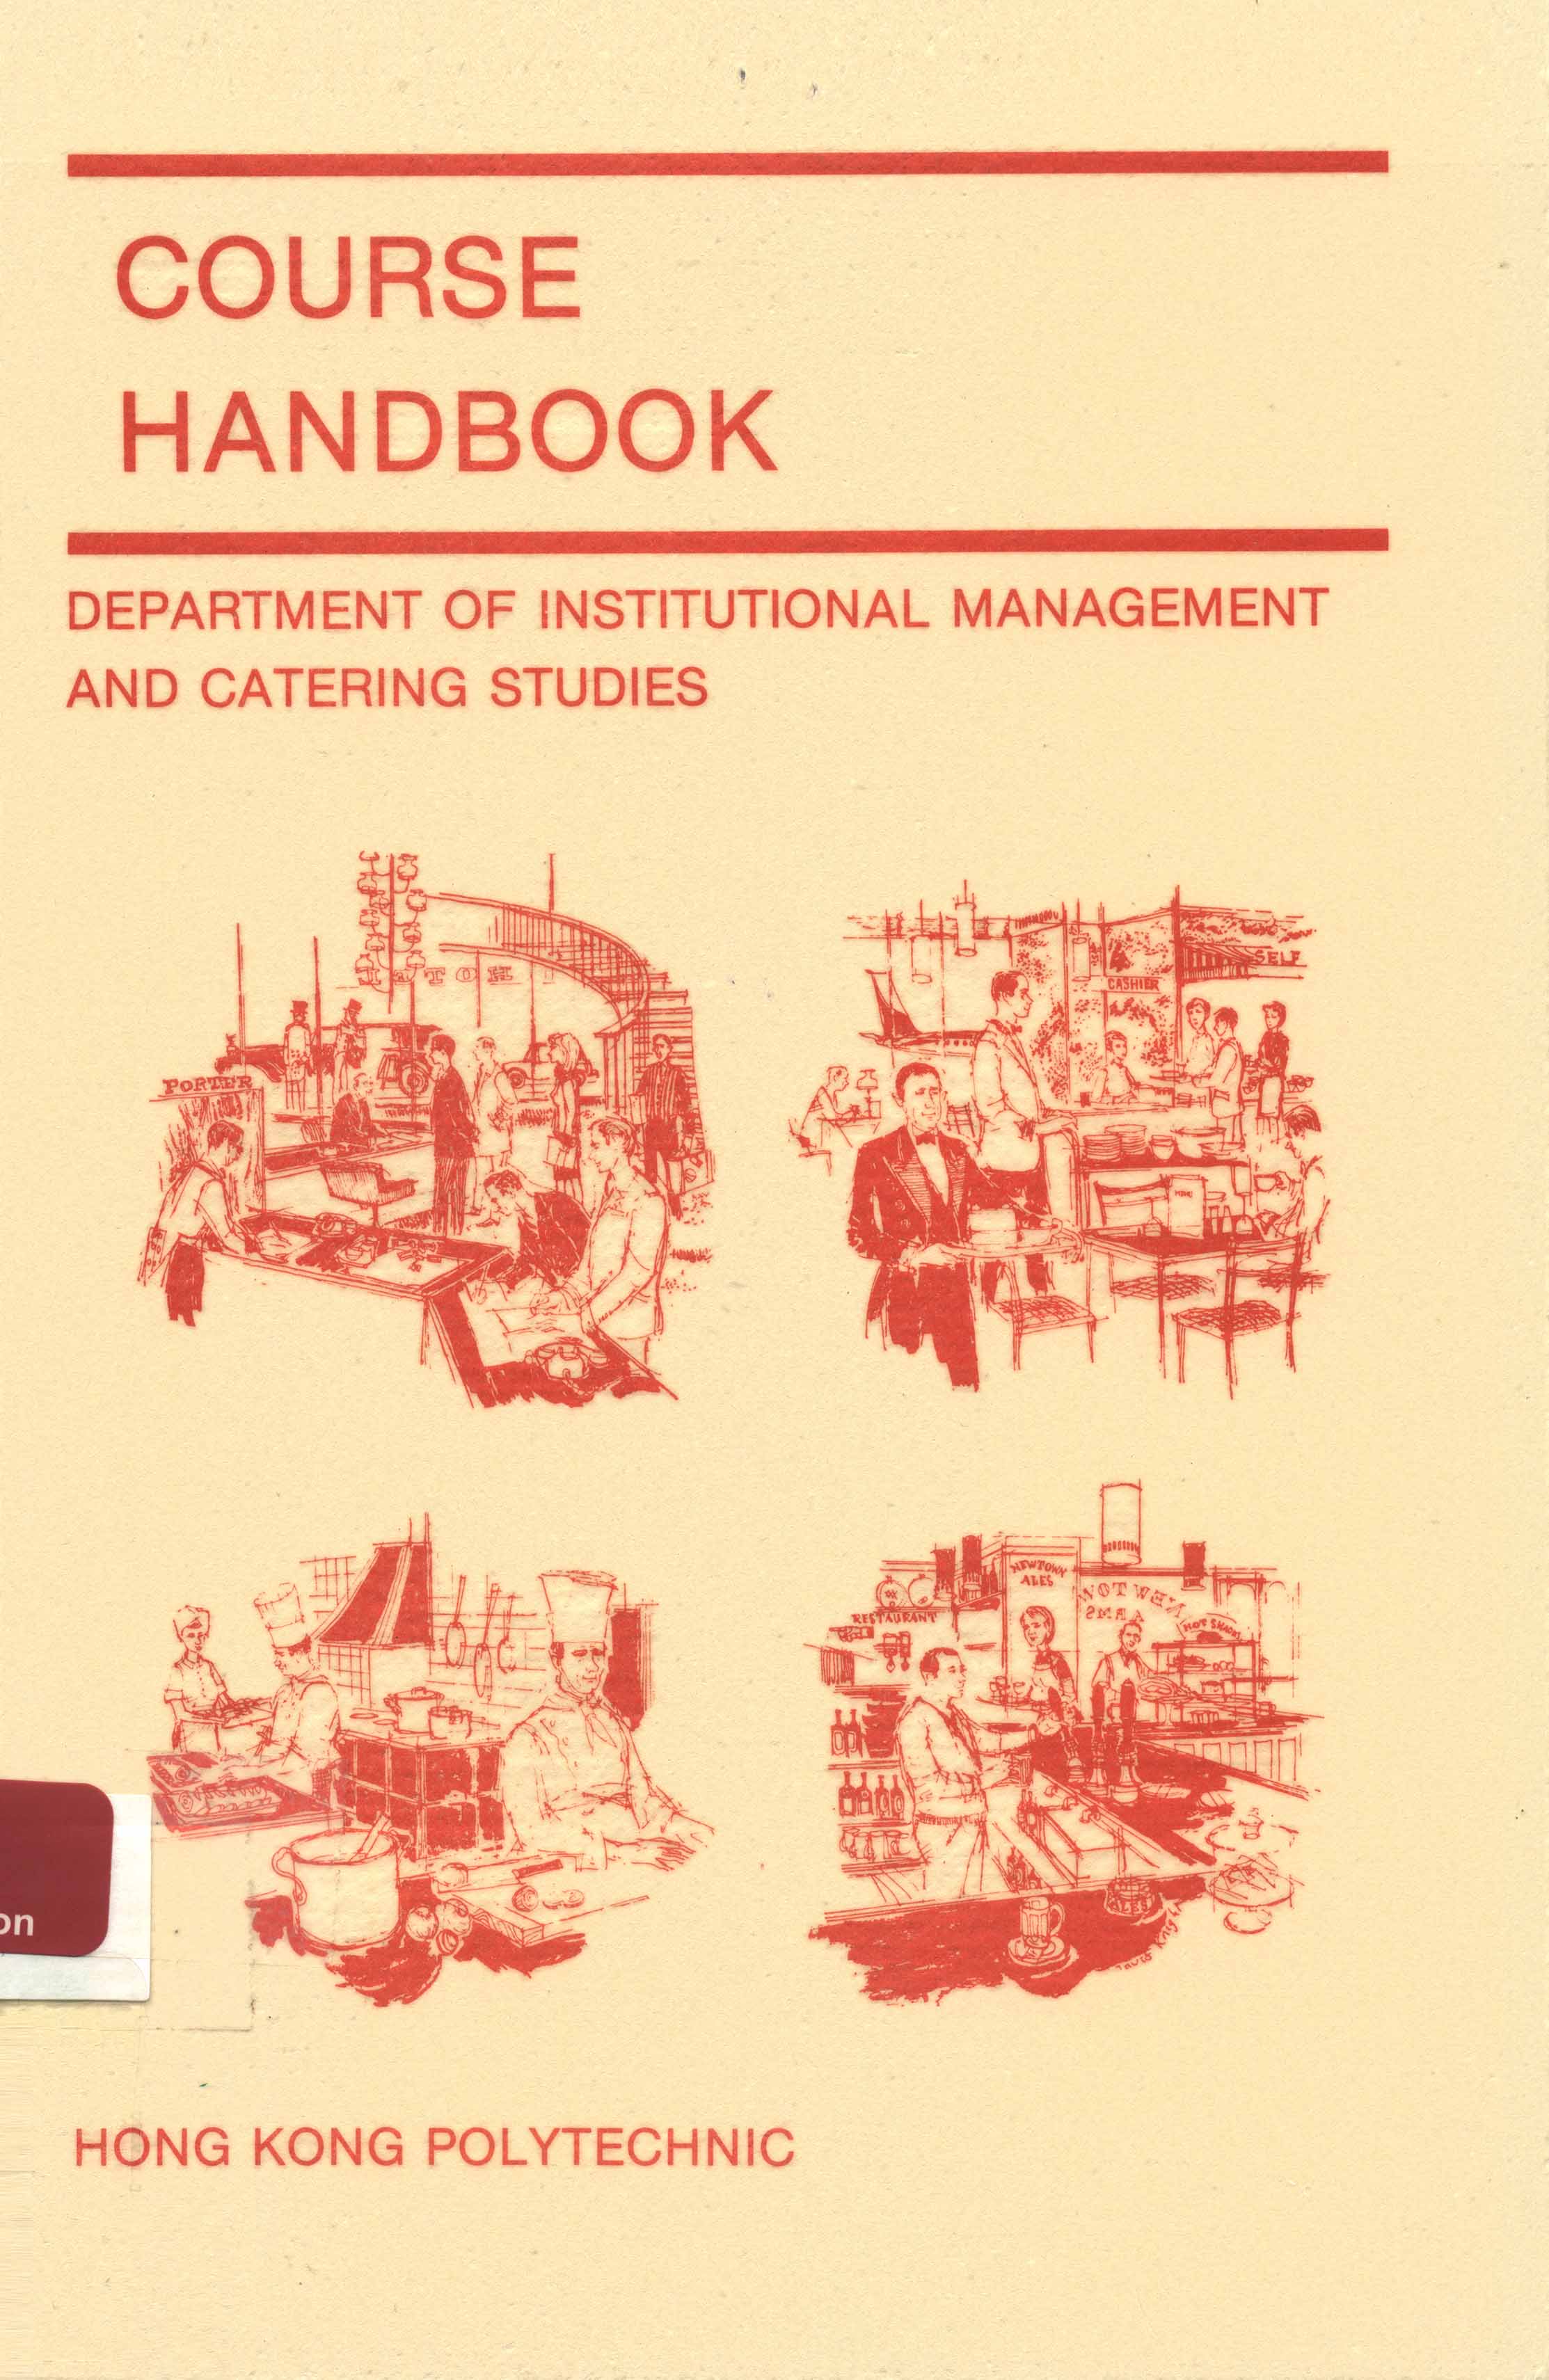 Course handbook: Hong Kong Polytechnic Department of Institutional Management and Catering Studies